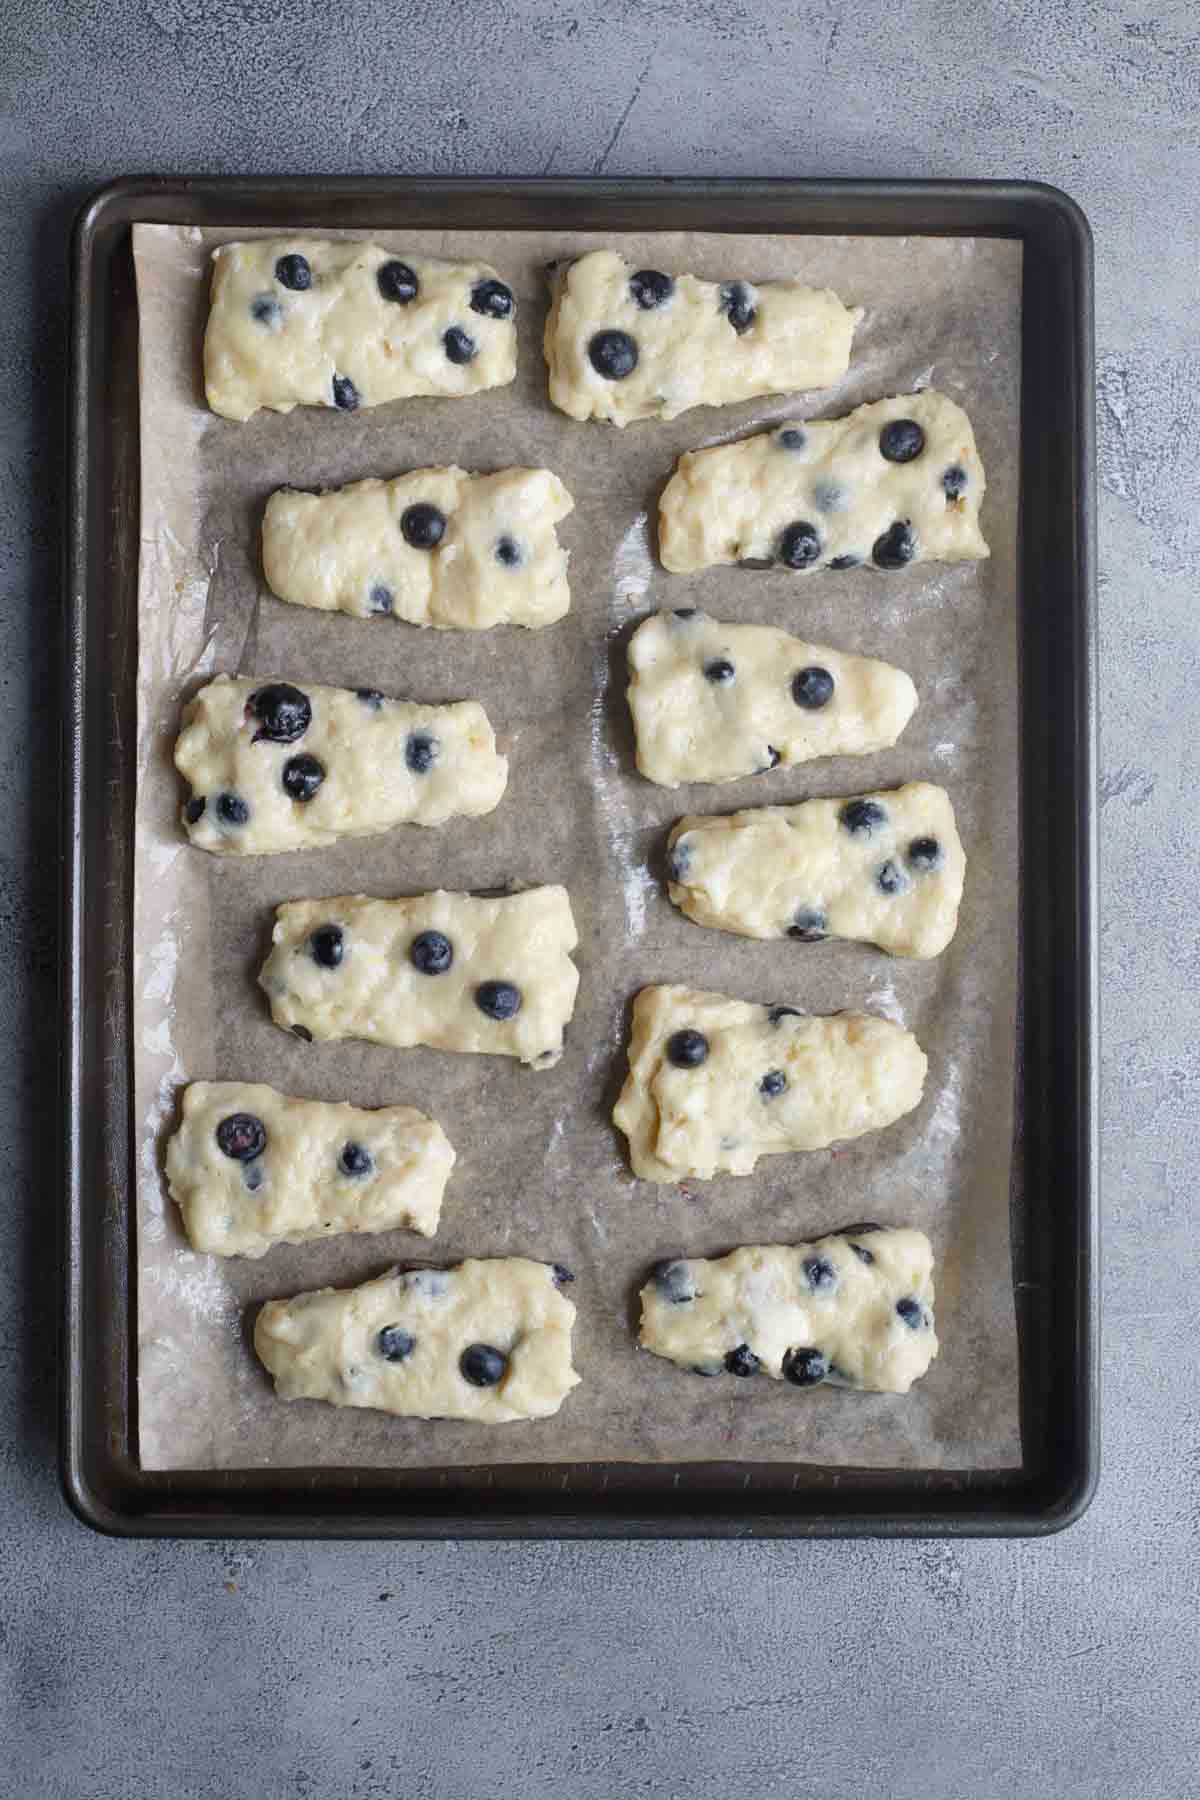 Divided blueberry scones, laid out on a baking sheet.